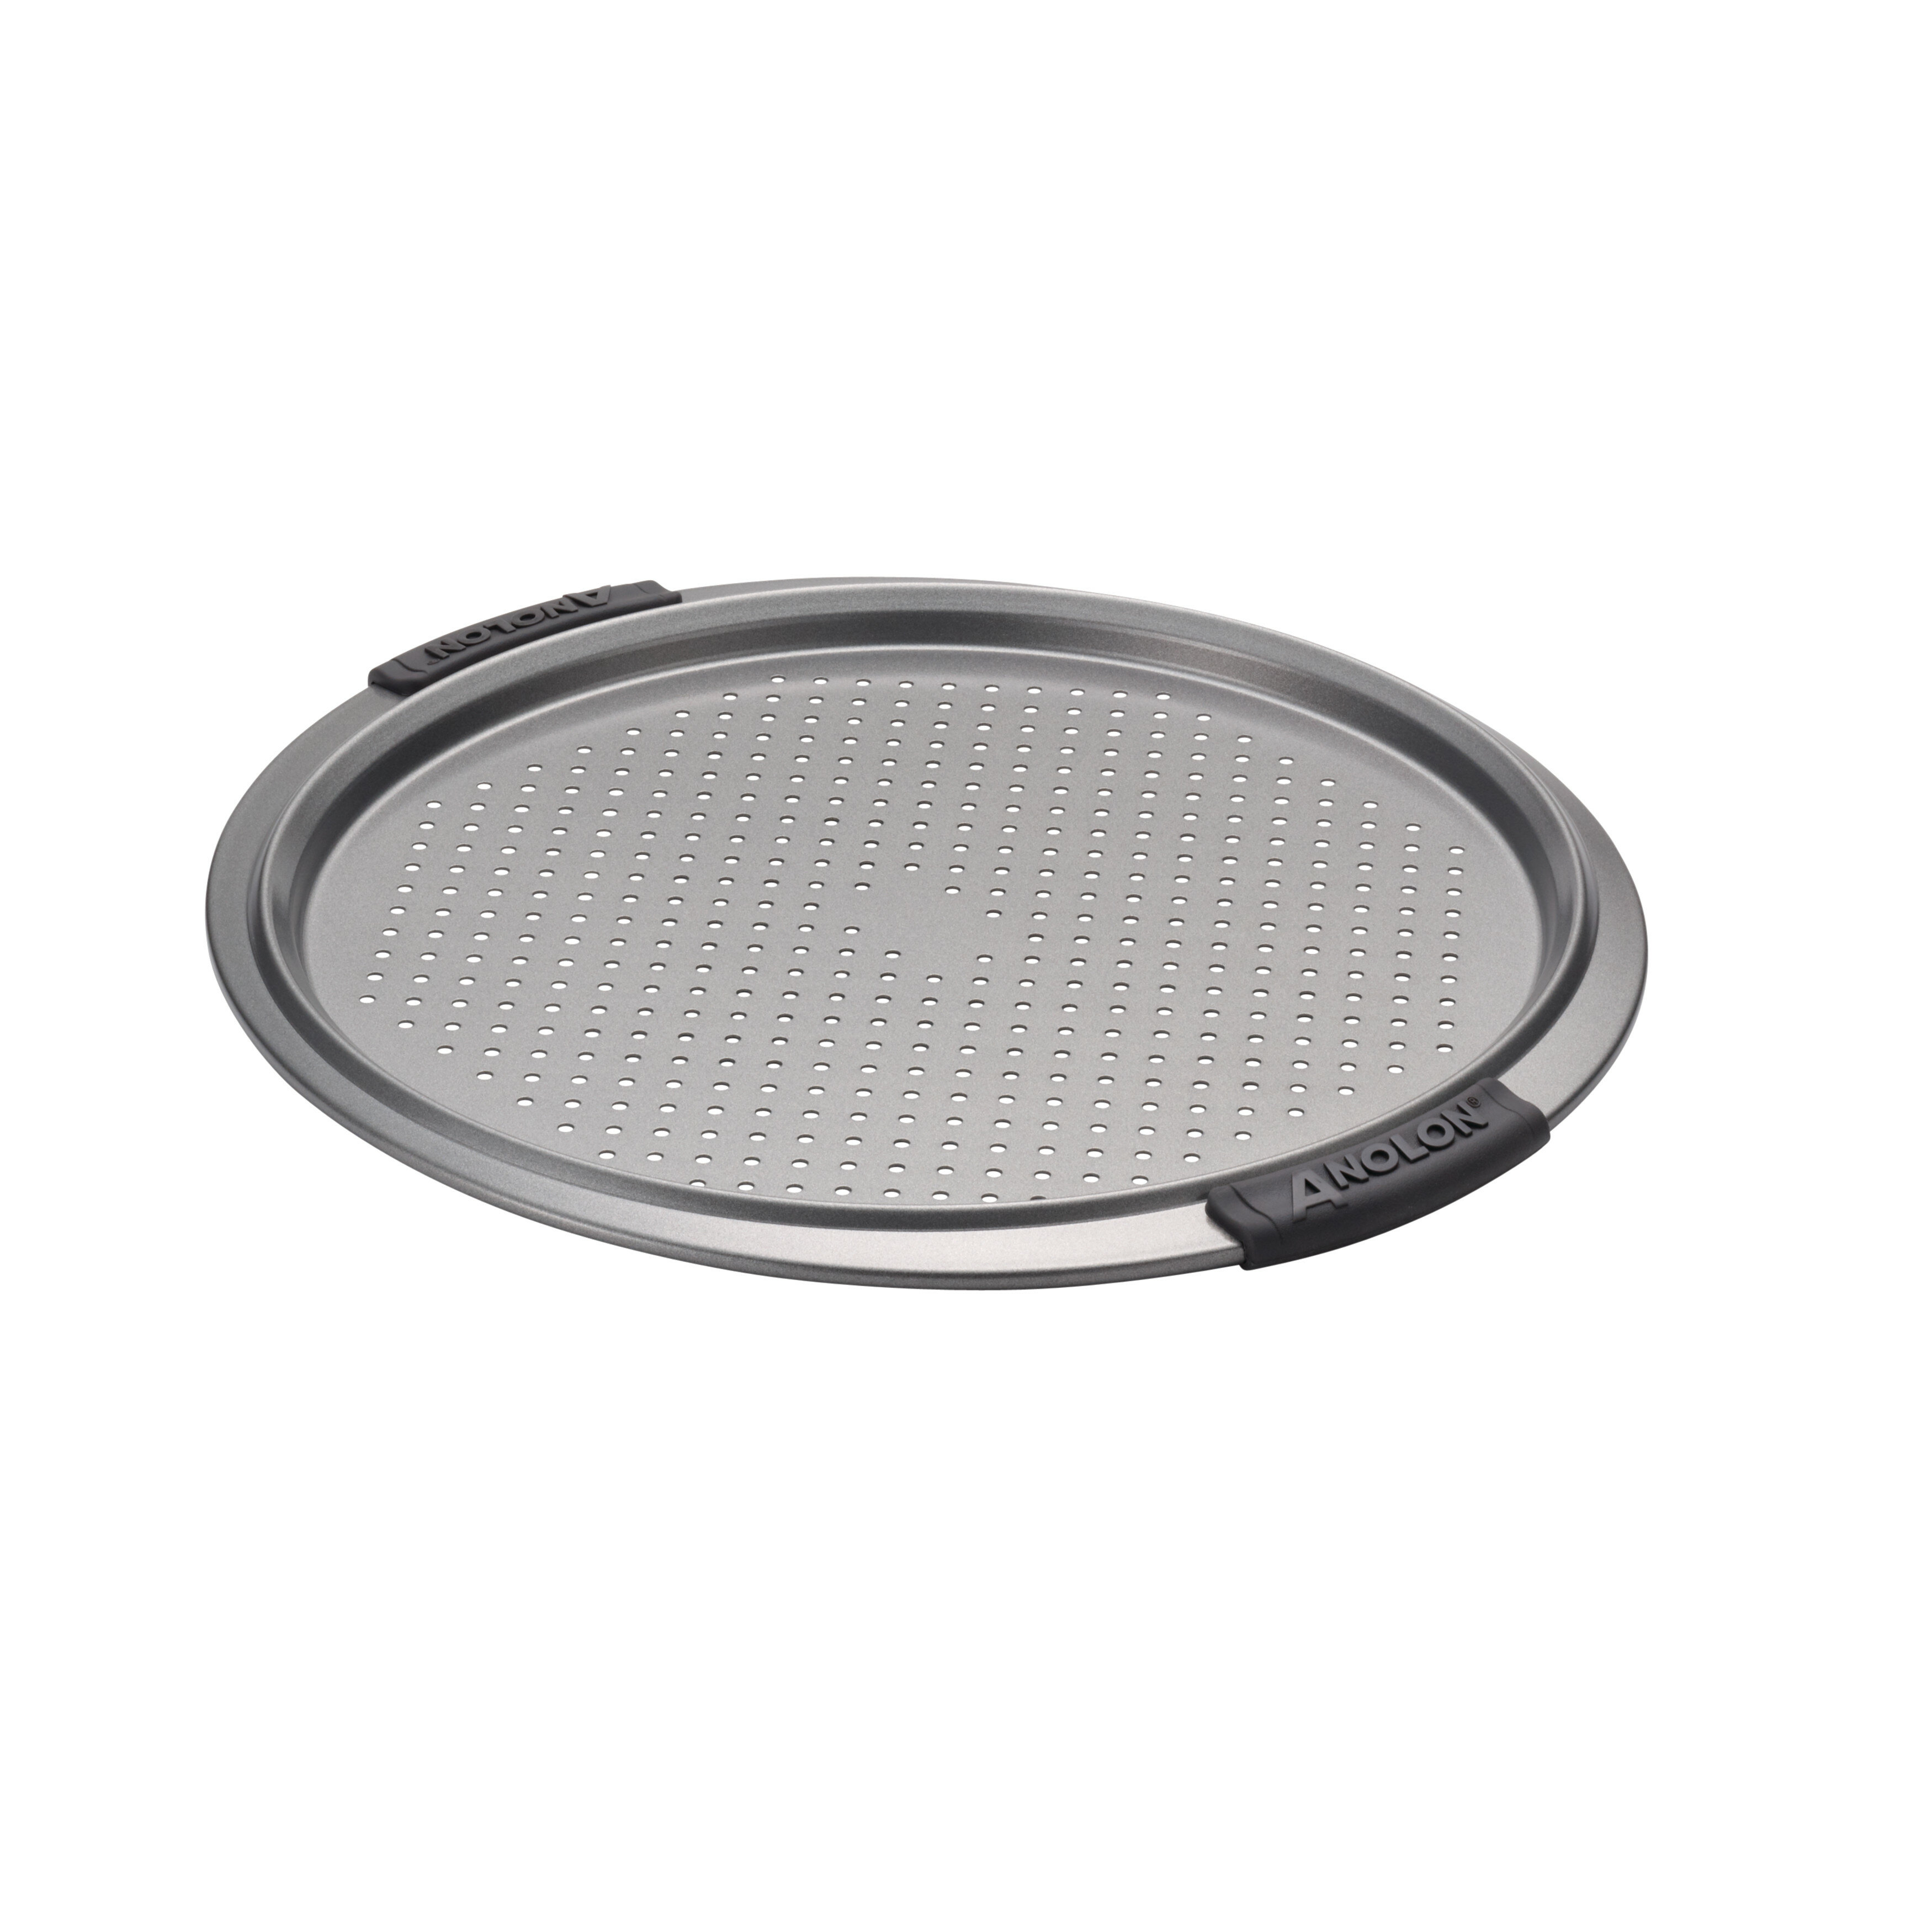 12/14 Inch Pizza Baking Pan Nonstick Carbon Steel Pizza Tray Round Baking  Sheet For Homemade Pizza Oven Pans